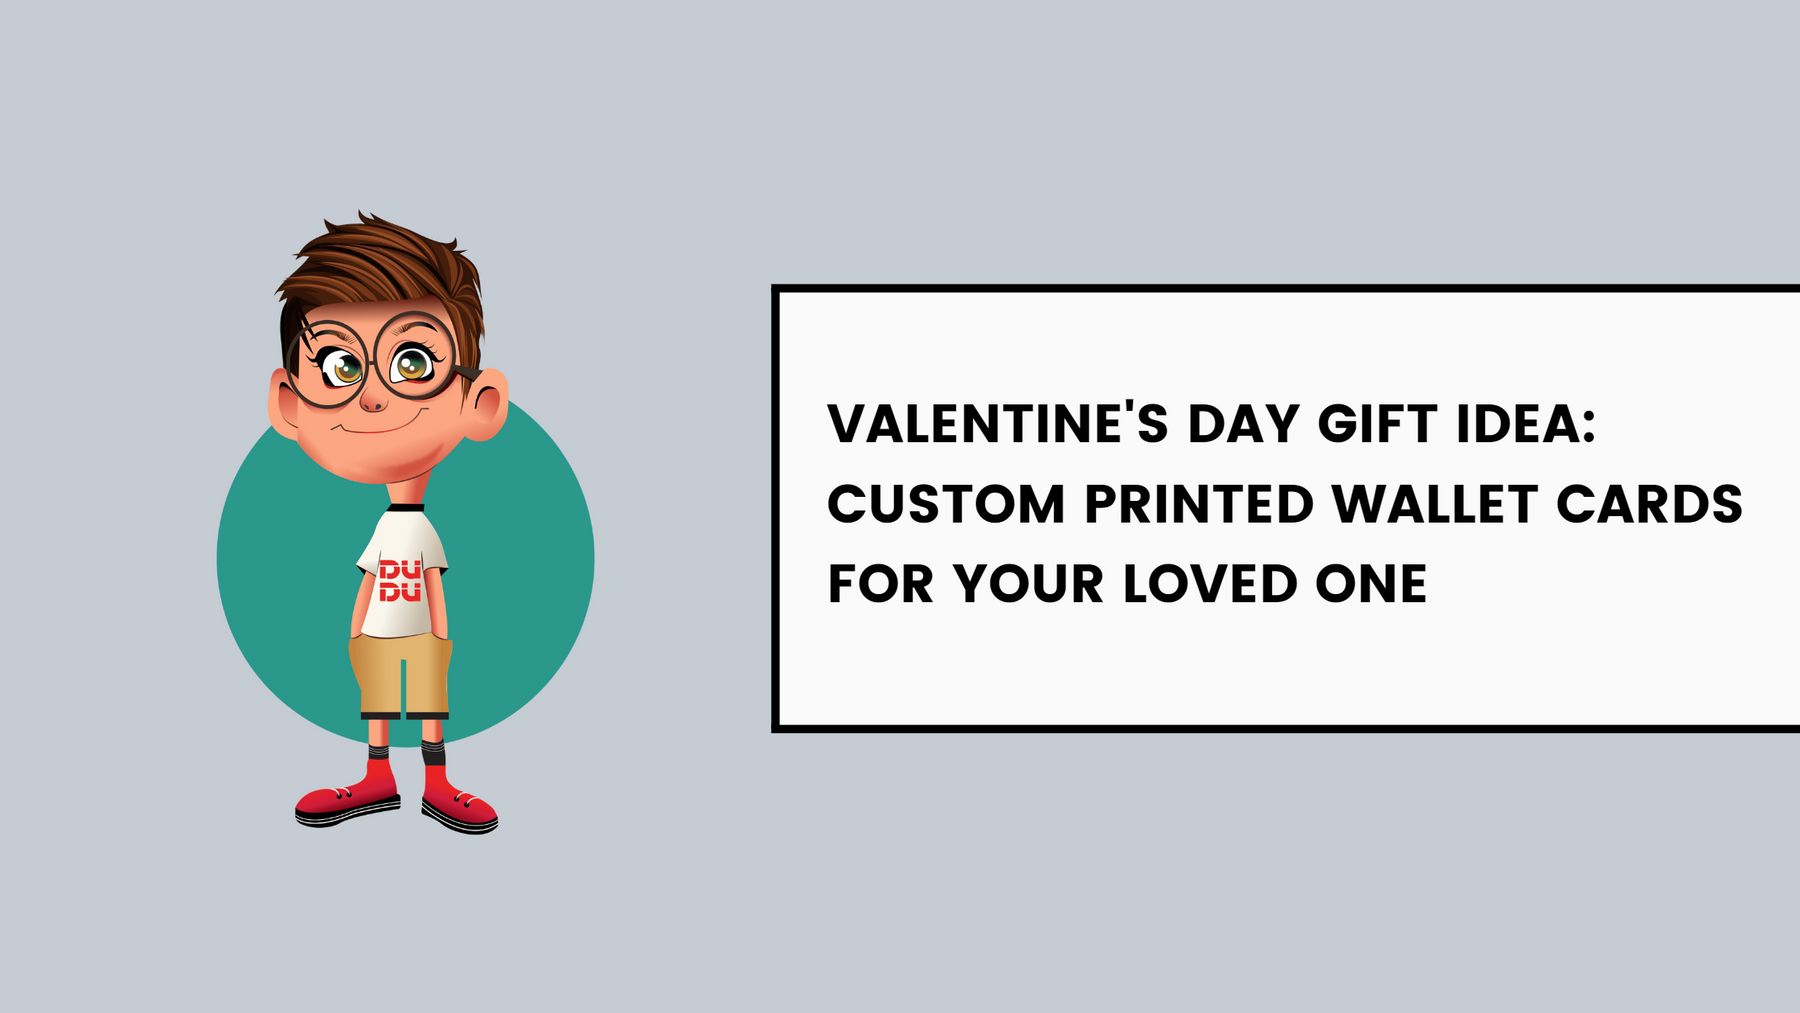 Valentine's Day Gift Idea: Custom Printed Wallet Cards For Your Loved One